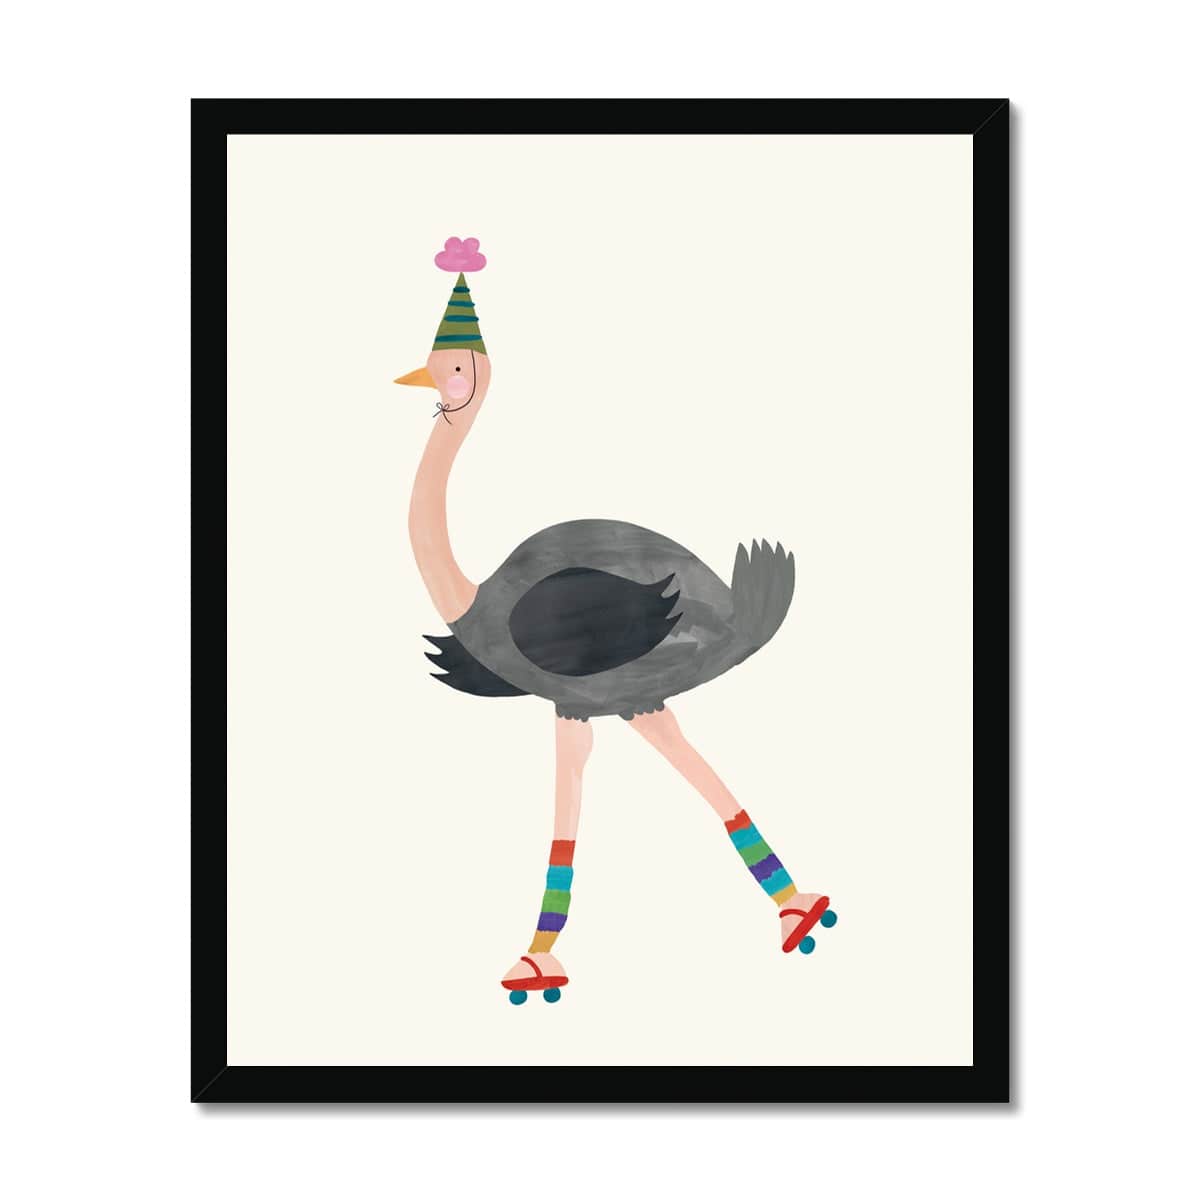 Art print in black frame. Our Ostrich art print features a skating ostrich in red skates with rainbow-coloured leg warmers. Wearing a party hat with a pink pom pom on the top of it as it skates, all on a neutral cream background.